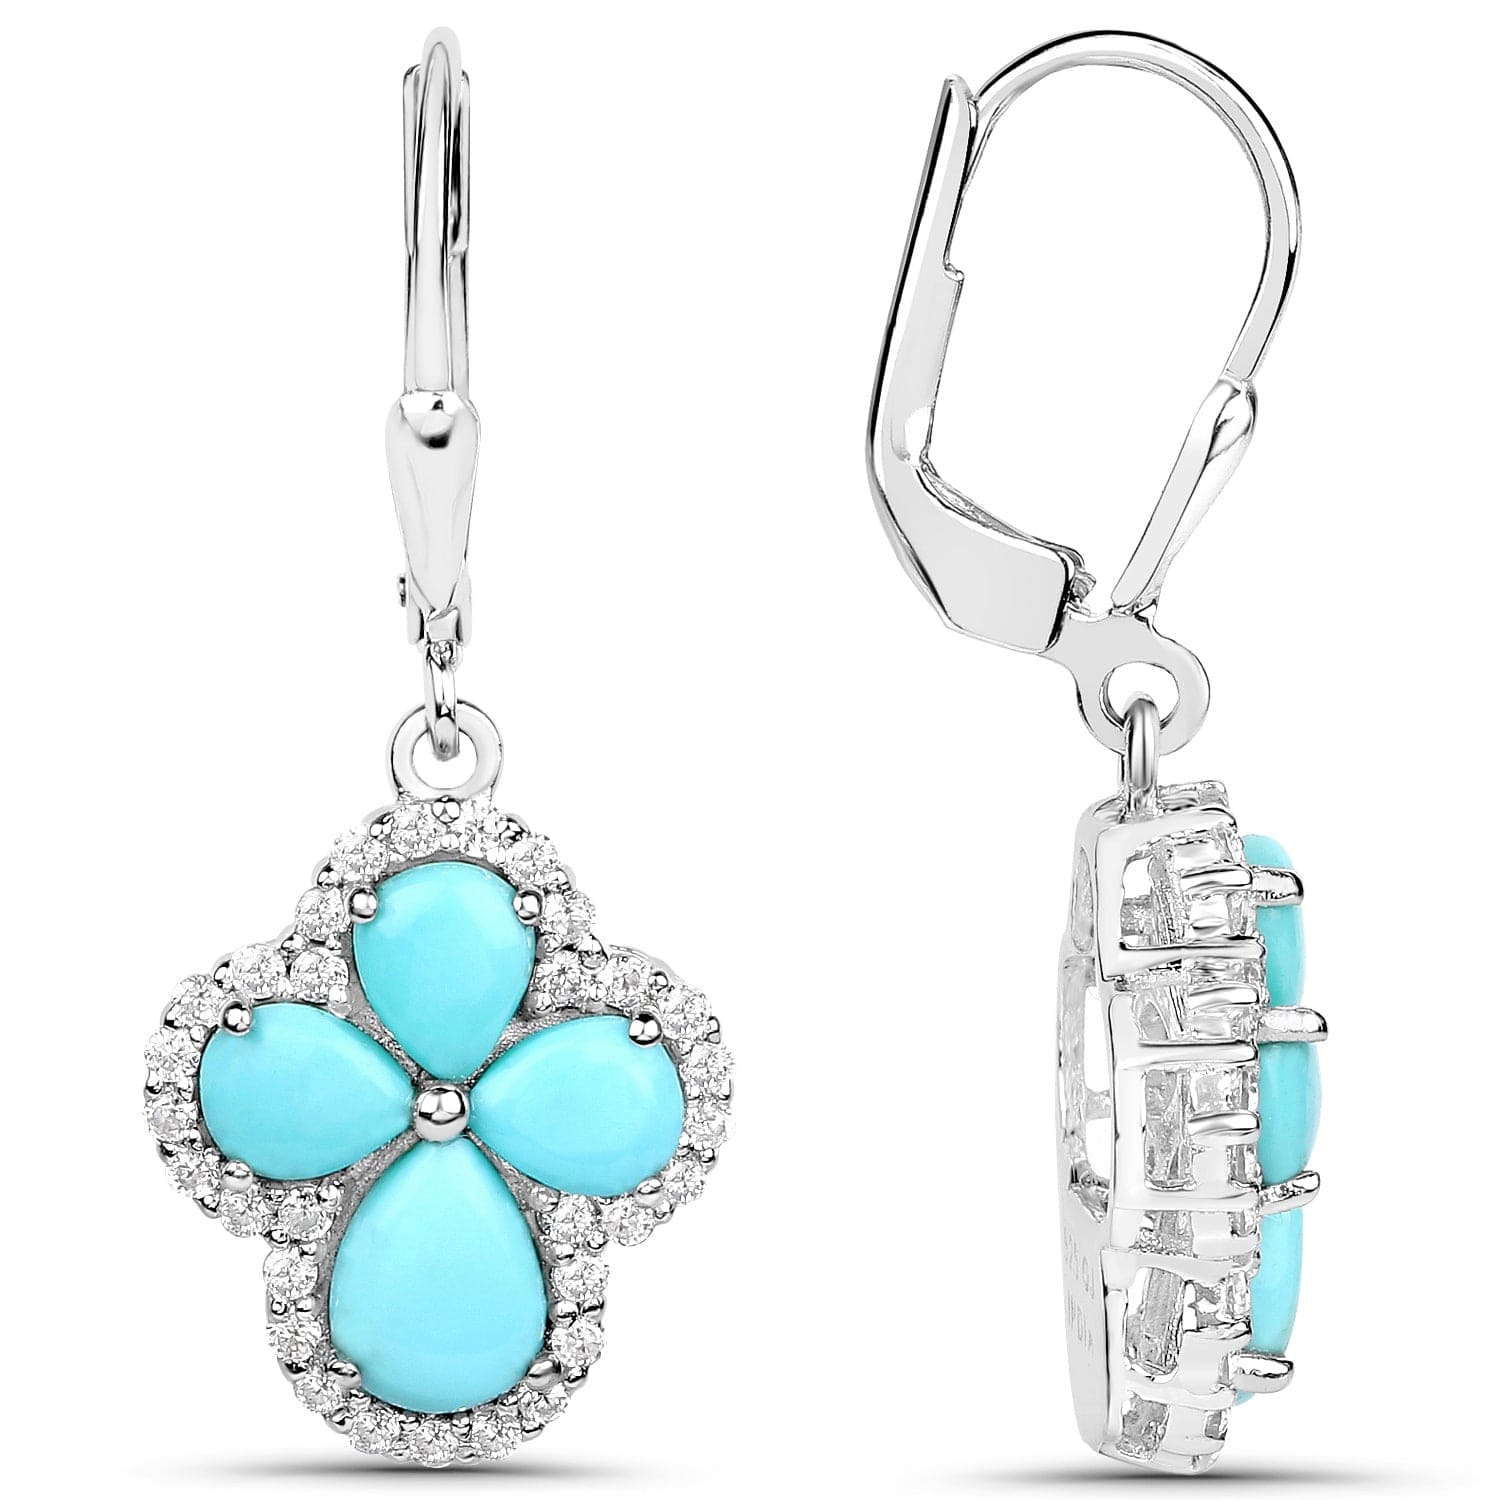 Genuine Tuquoise Cross Earrings with Zircon 925 Sterling Silver